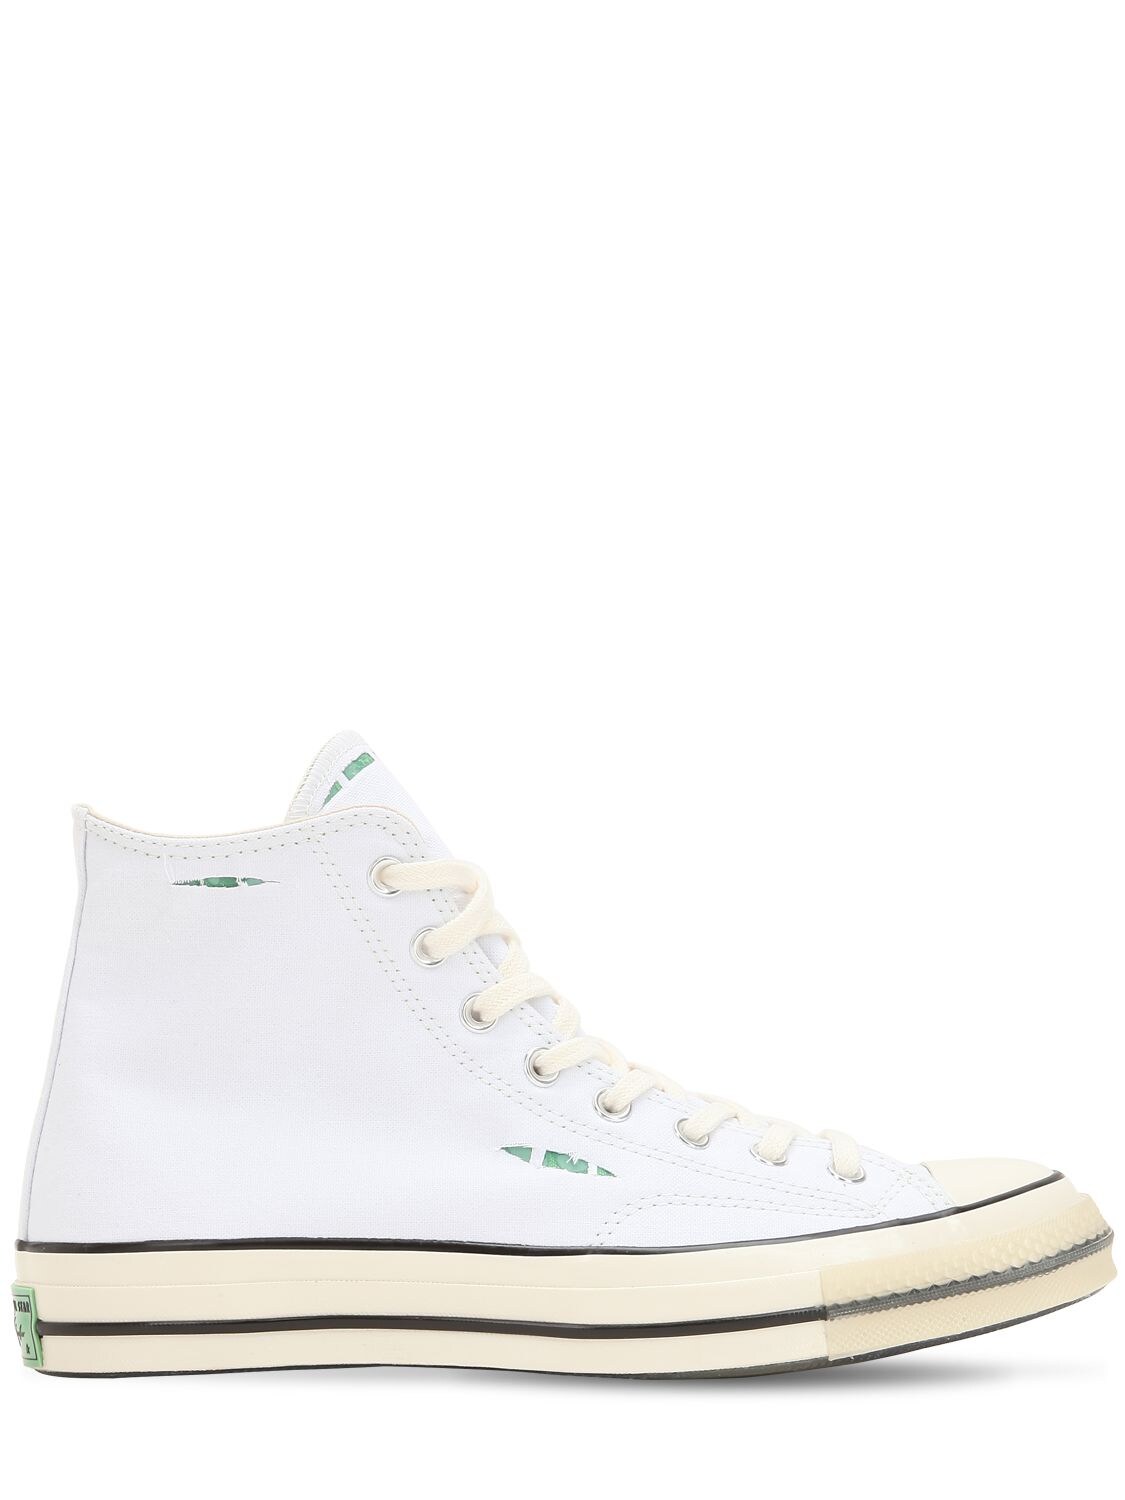 Converse X Dr.woo Dr. Woo Chuck Taylor 70 Hi Top Sneakers In White/green